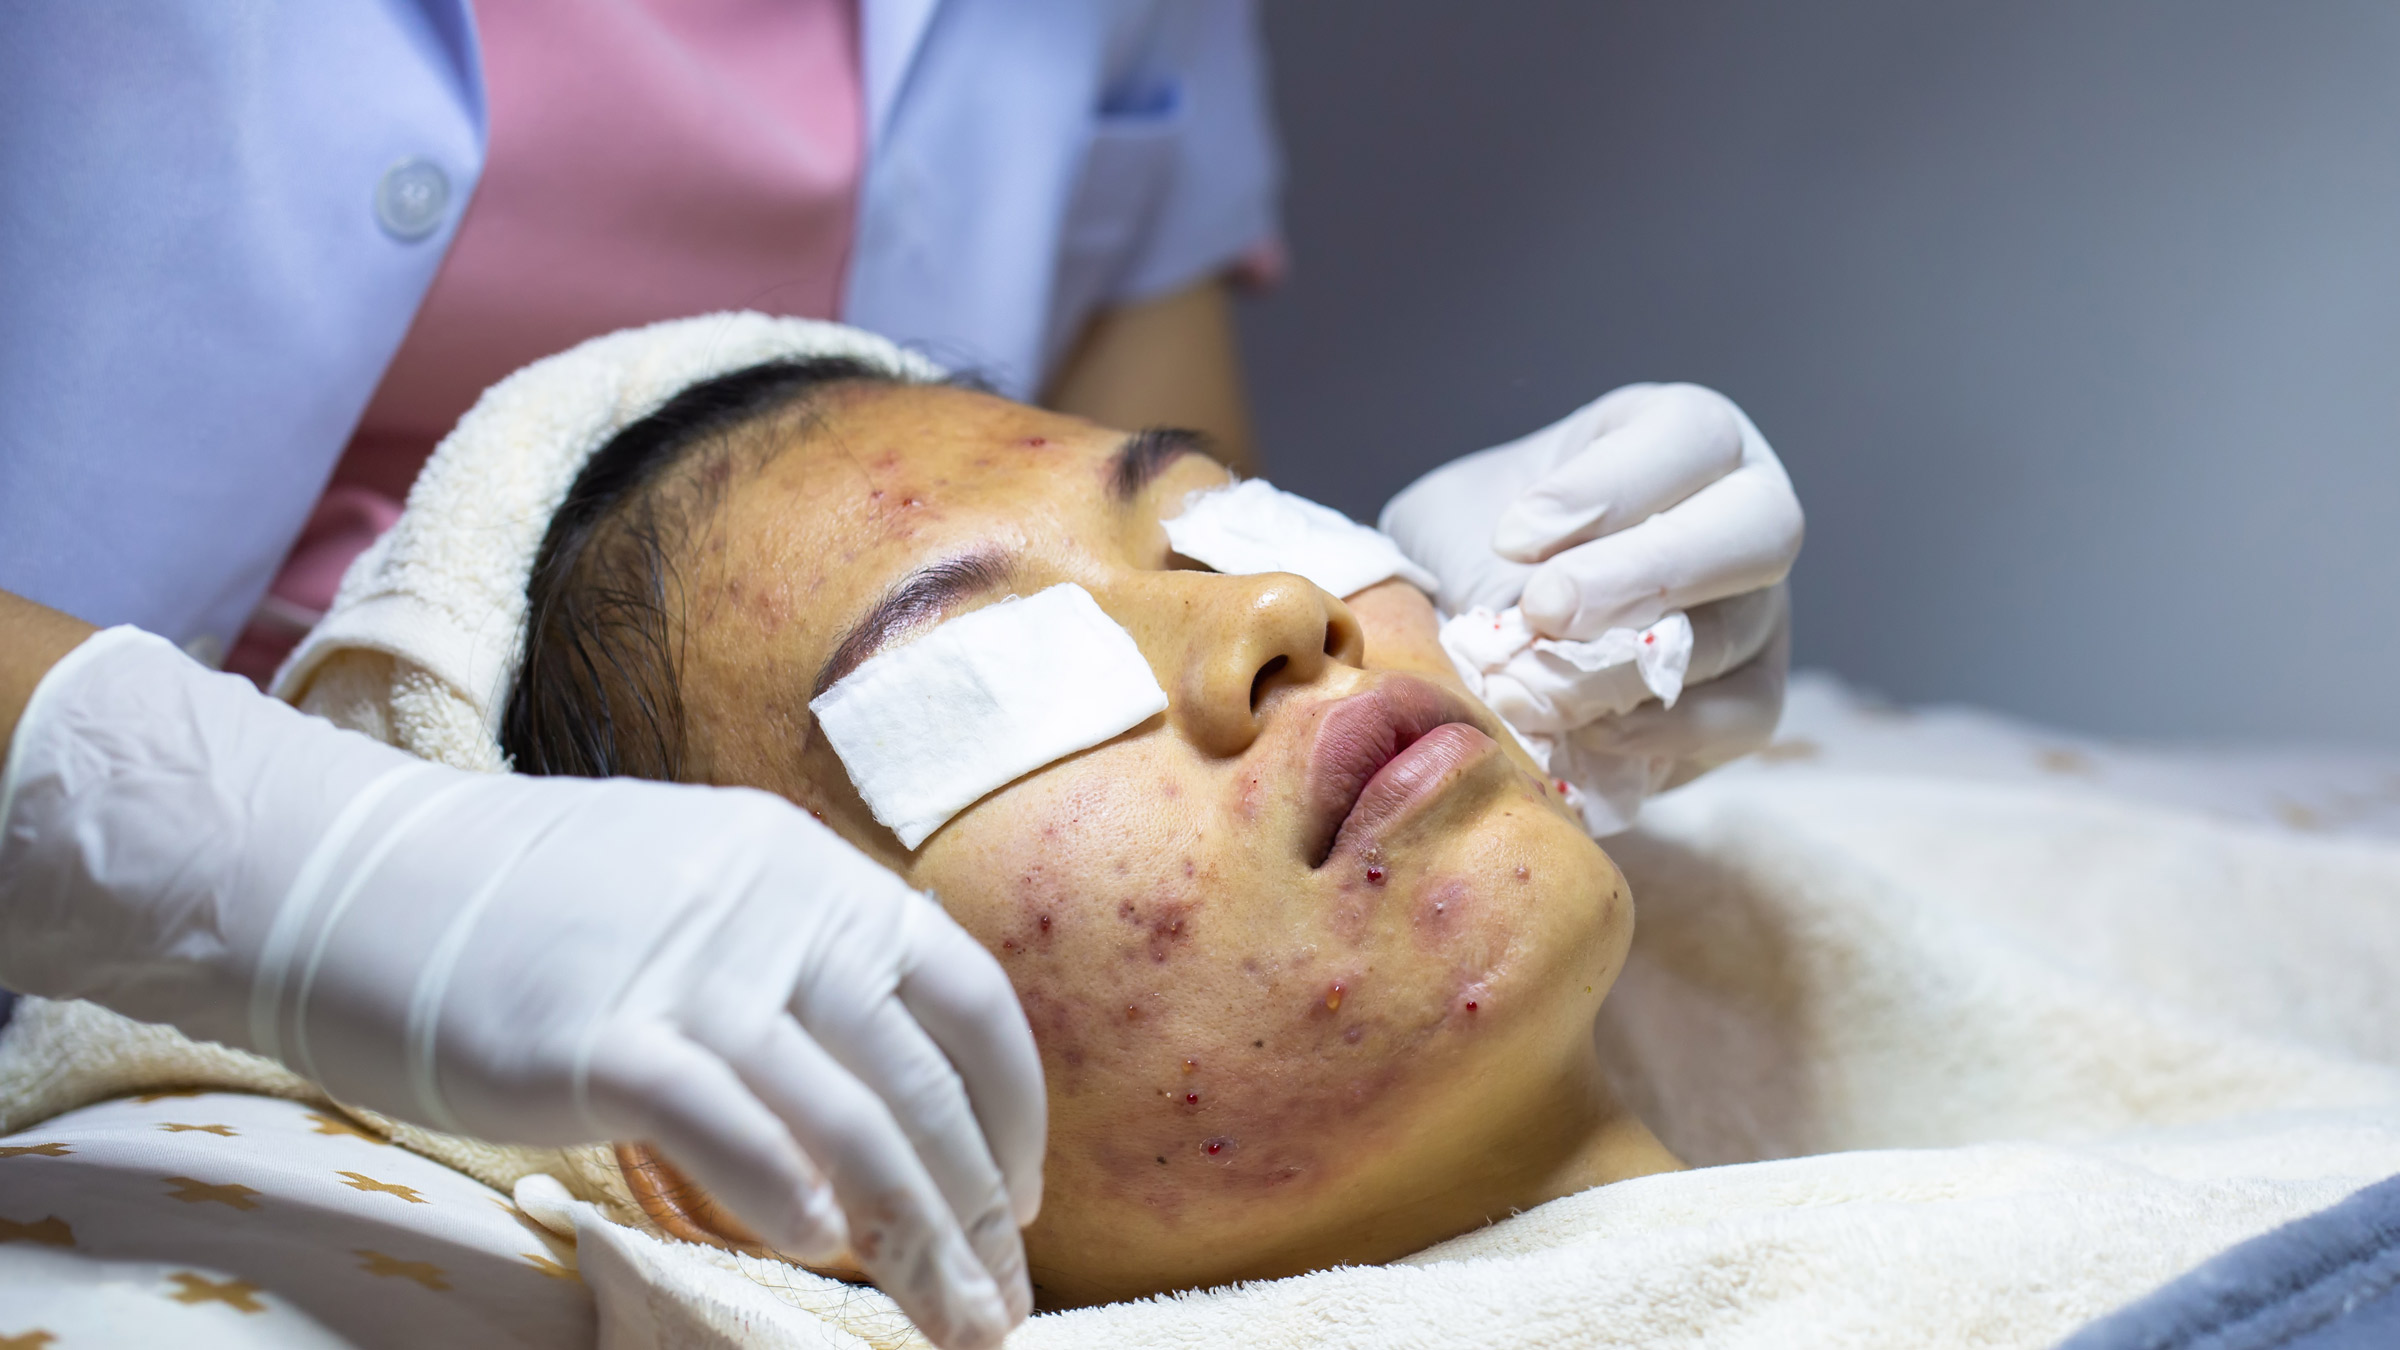 A person with severe acne getting a treatment from a dermatologist. 
Tinnakorn Jorruang/iStock via Getty Images Plus  